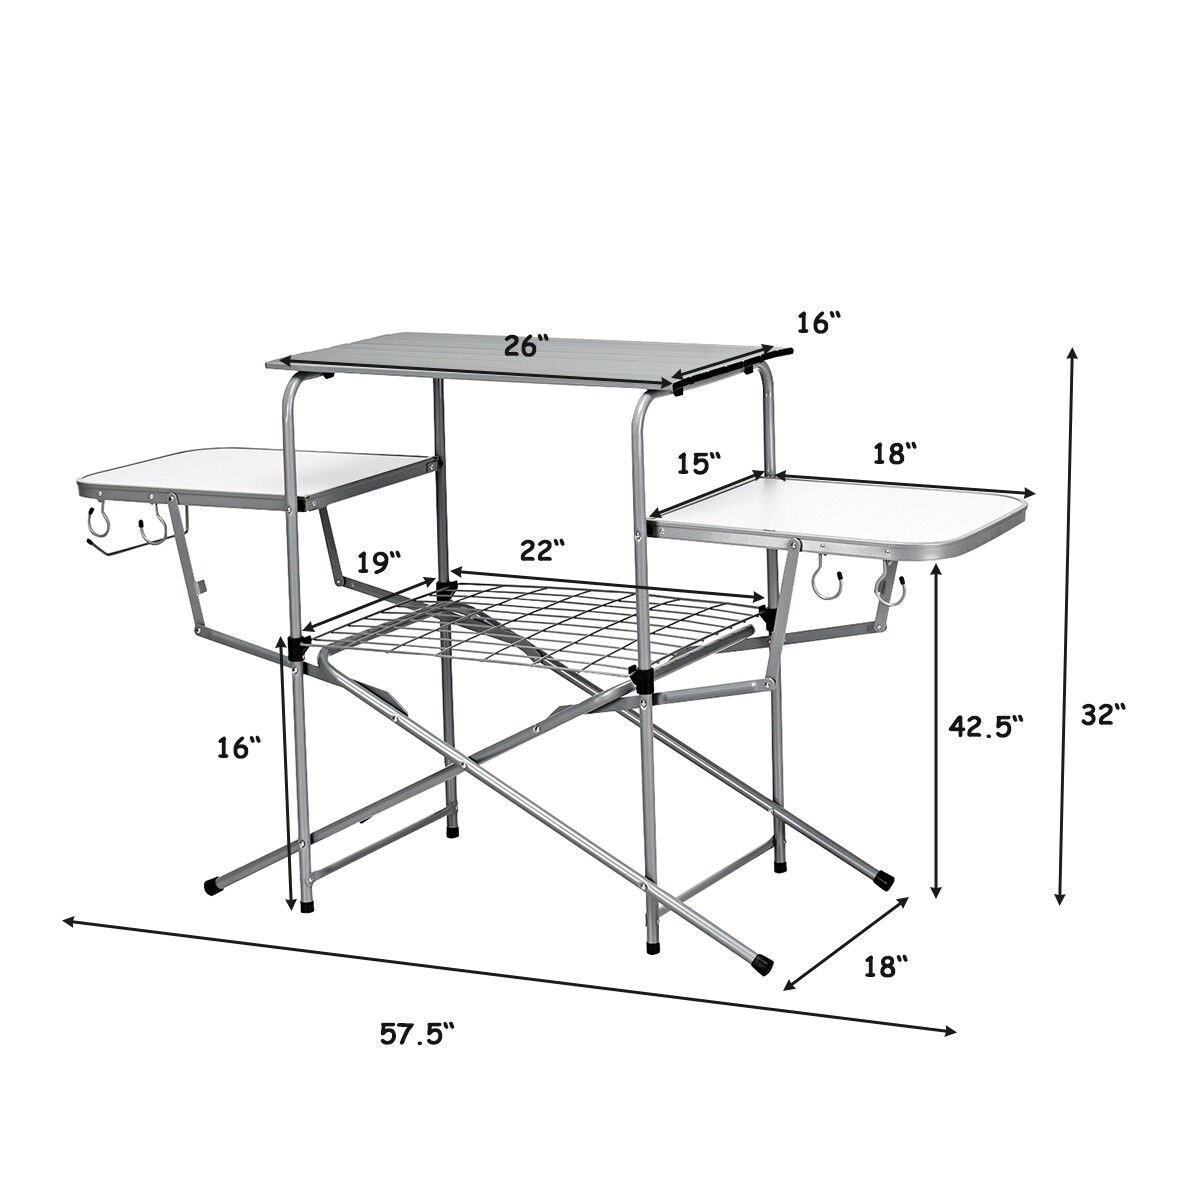 https://ak1.ostkcdn.com/images/products/is/images/direct/570b9958819c293bb9d6bd0213970ee2a35cae32/Foldable-Outdoor-BBQ-Table-Grilling-Stand.jpg